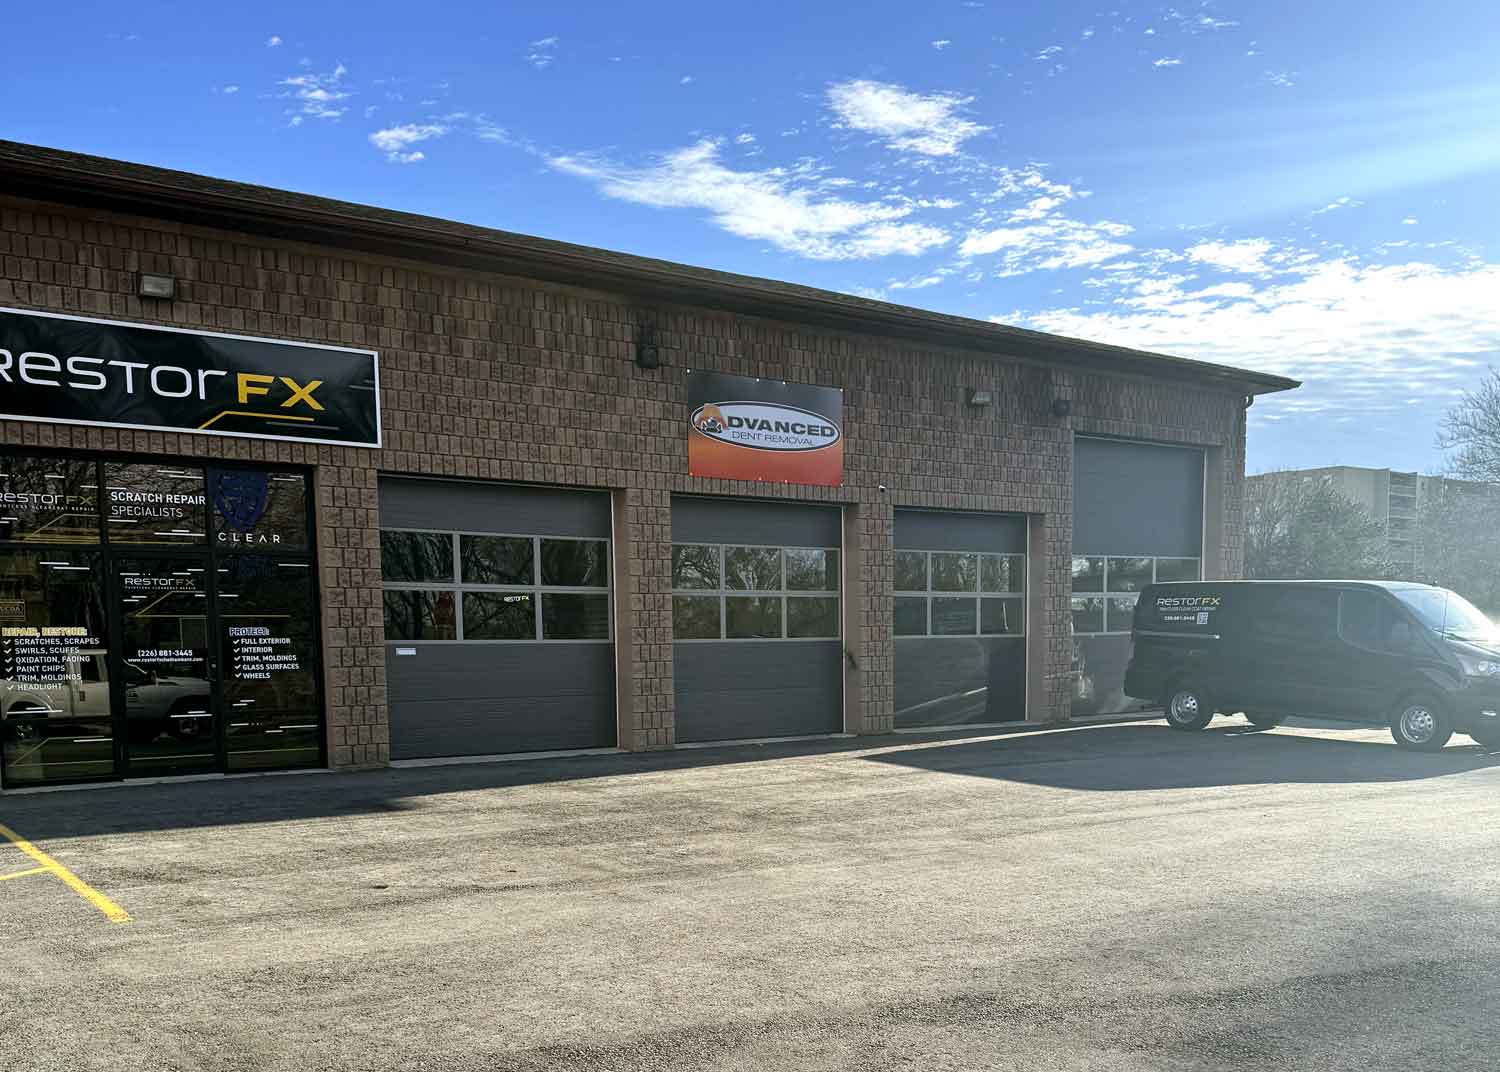 RestorFX Chatham Kent storefront with brick walls, garage doors and branded signage with black branded van parked in front